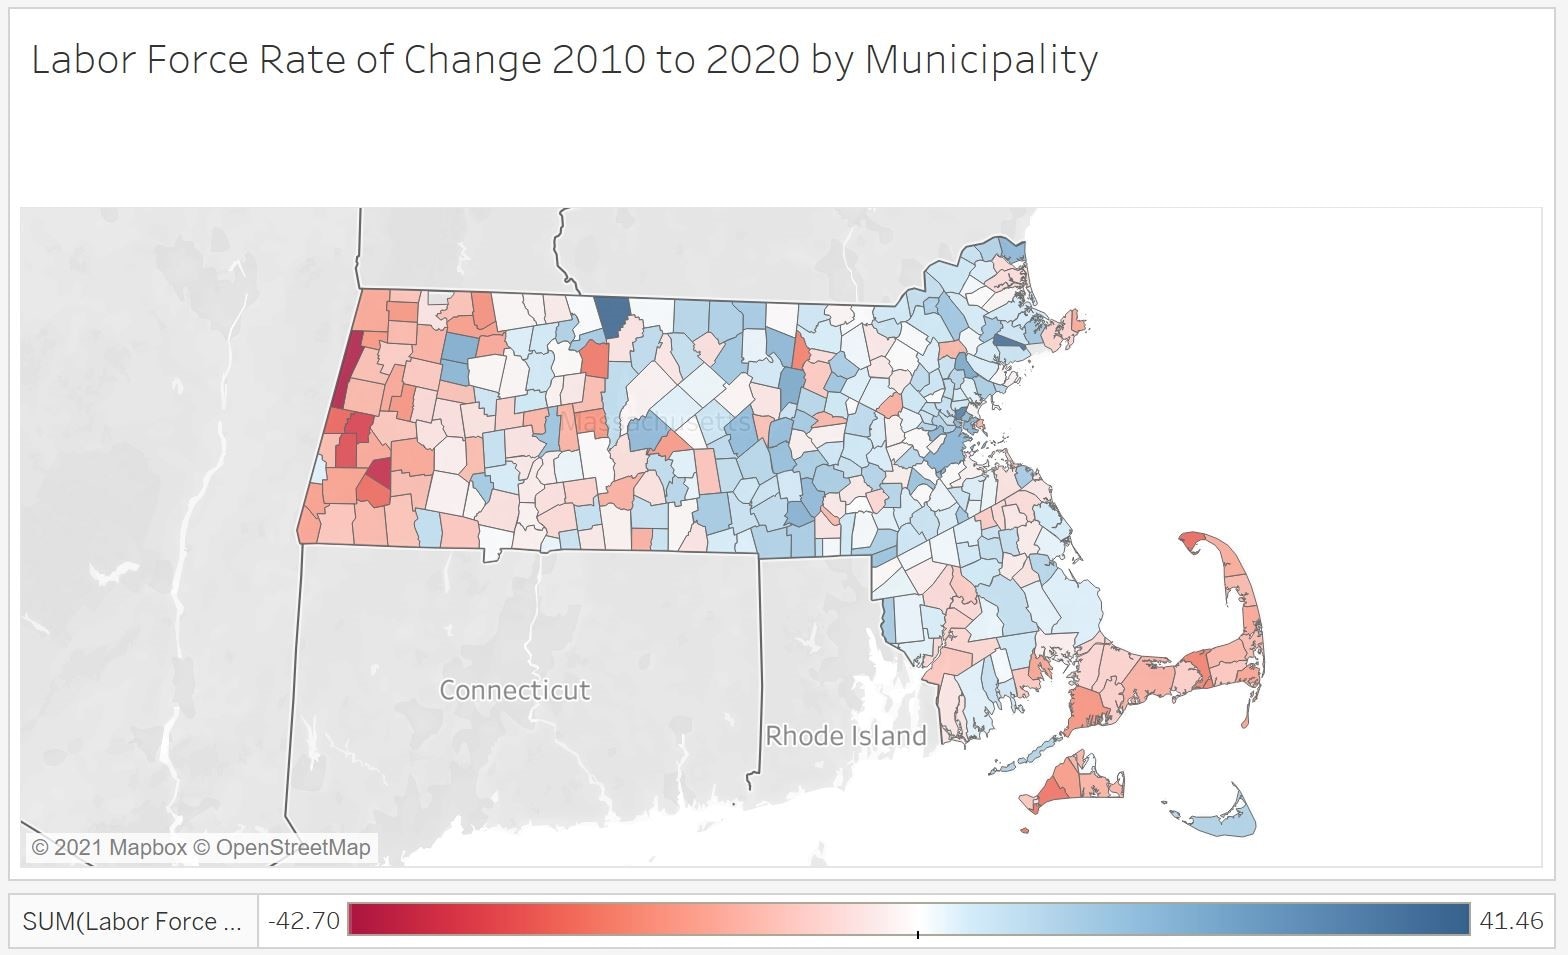 Figure 5—Labor Force Rate of Change by Municipality, 2010 to 2020 